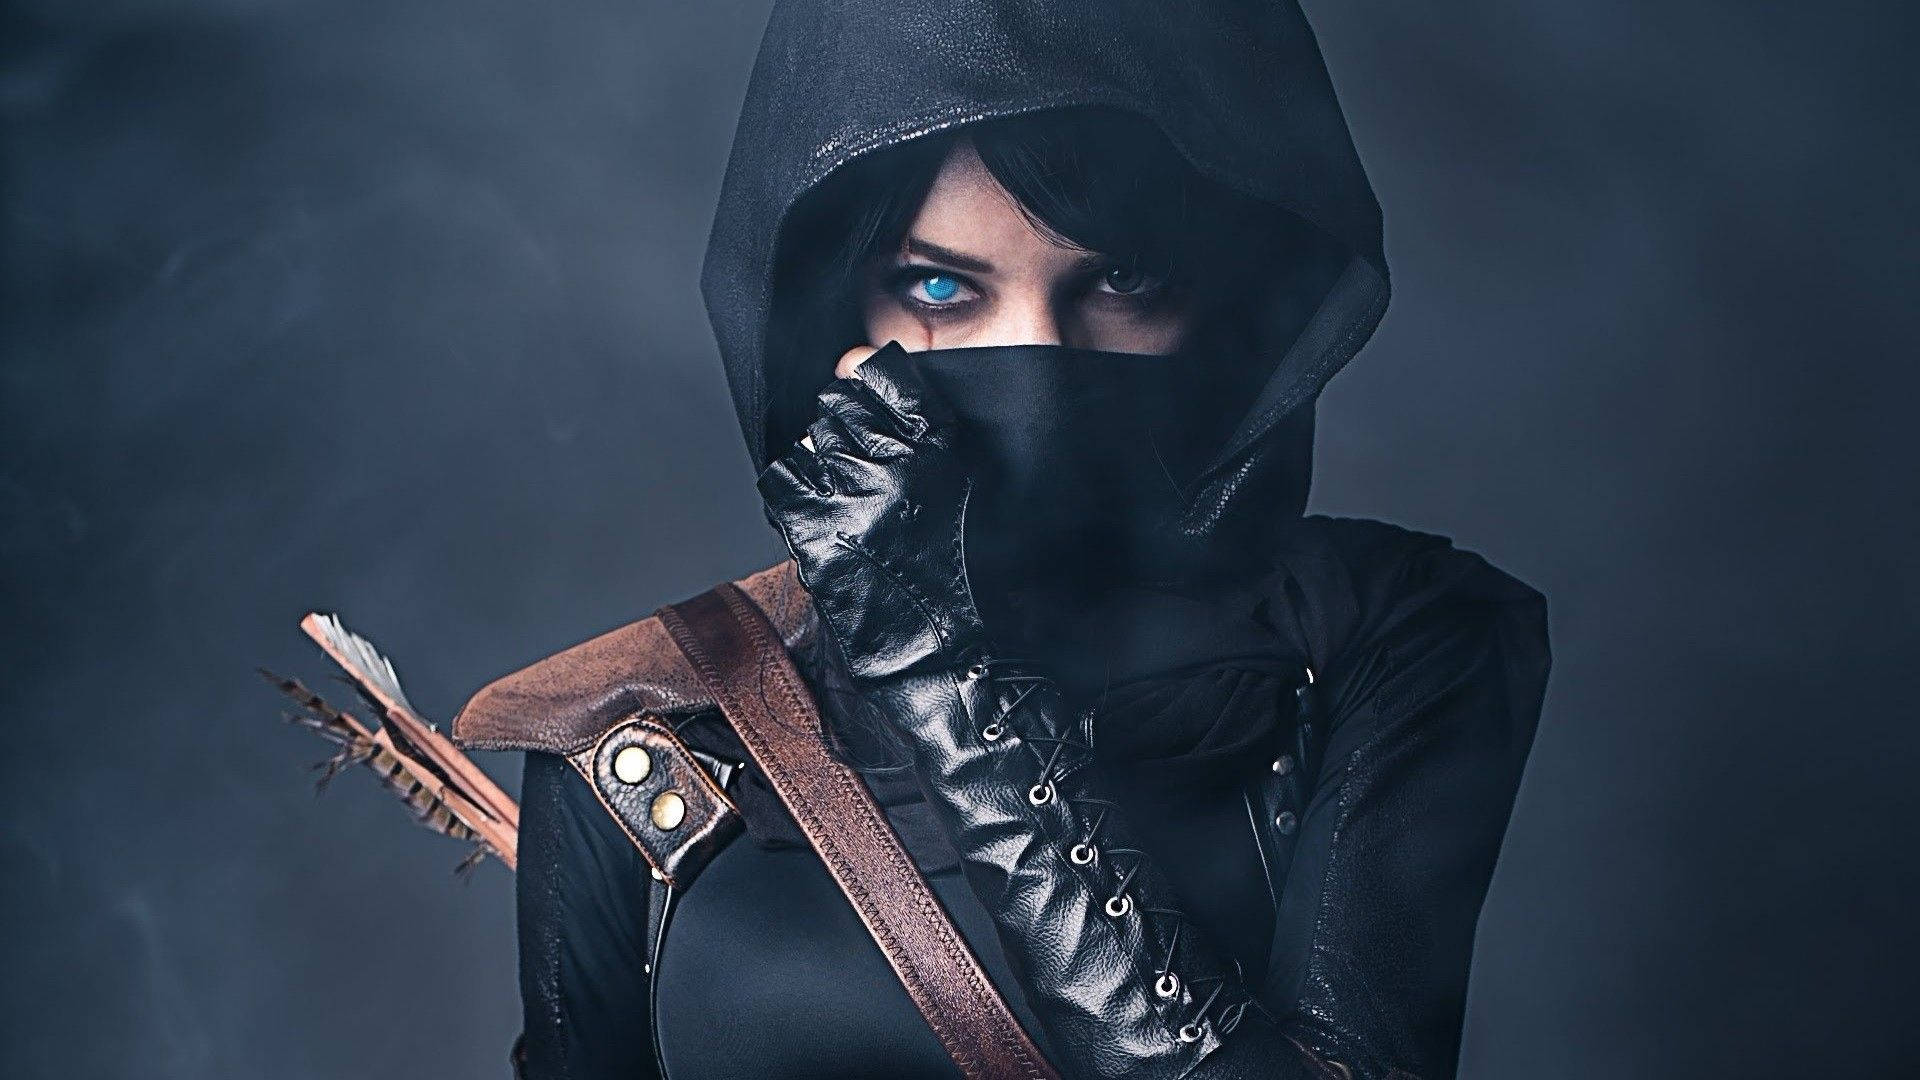 Thief Covering Her Face Wallpaper